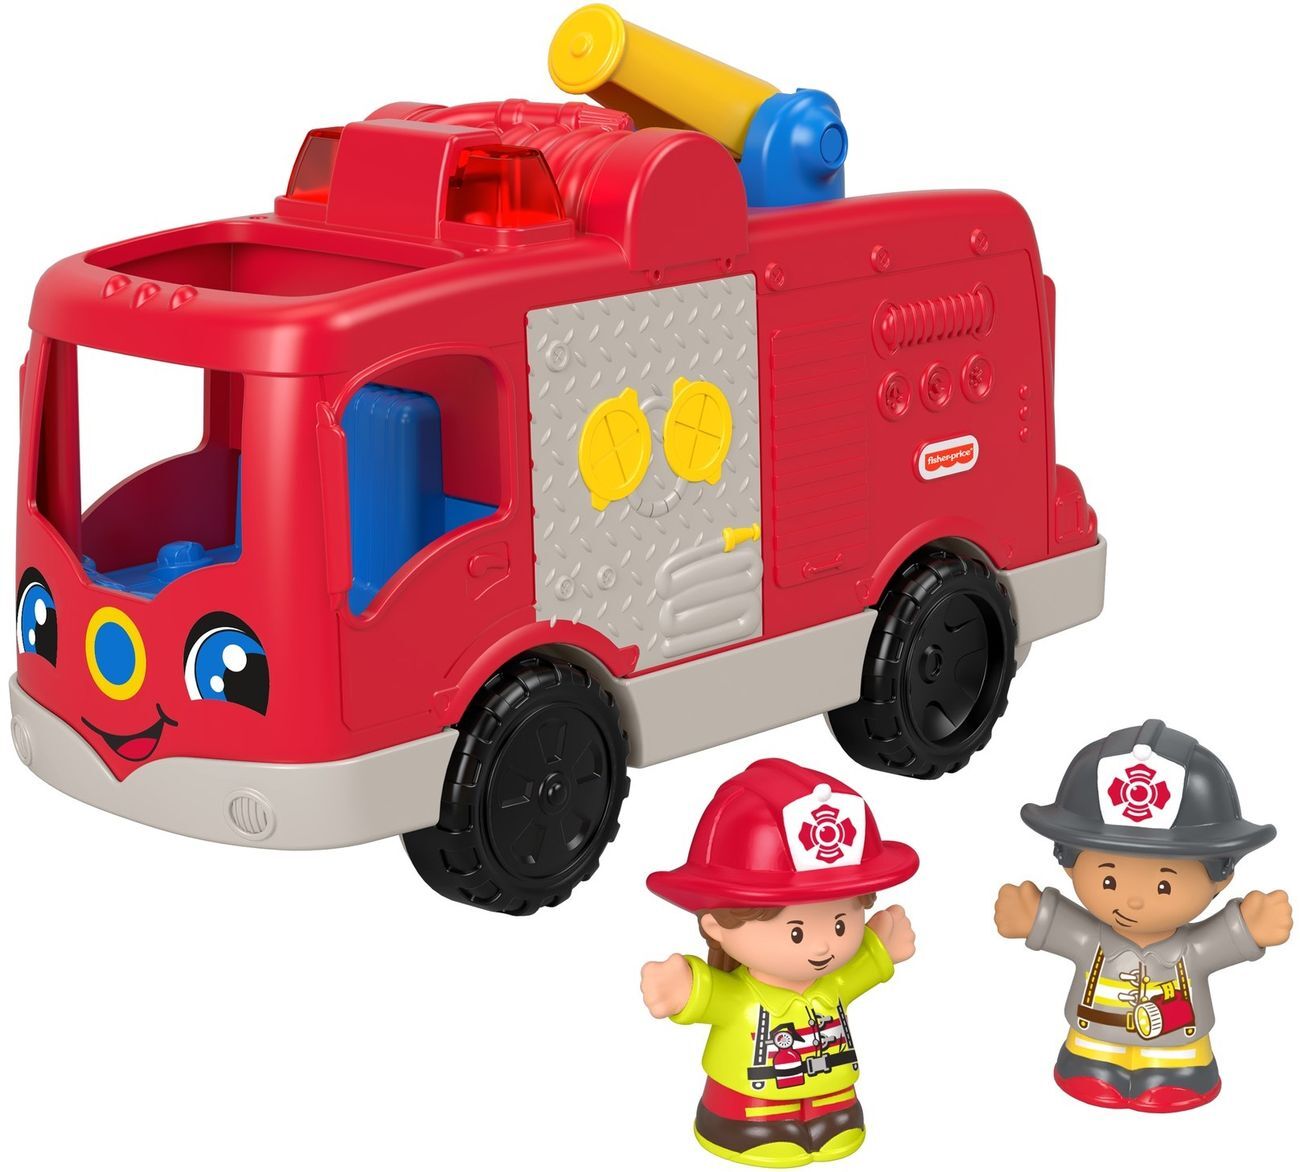 Little People - Helping Others Fire Truck